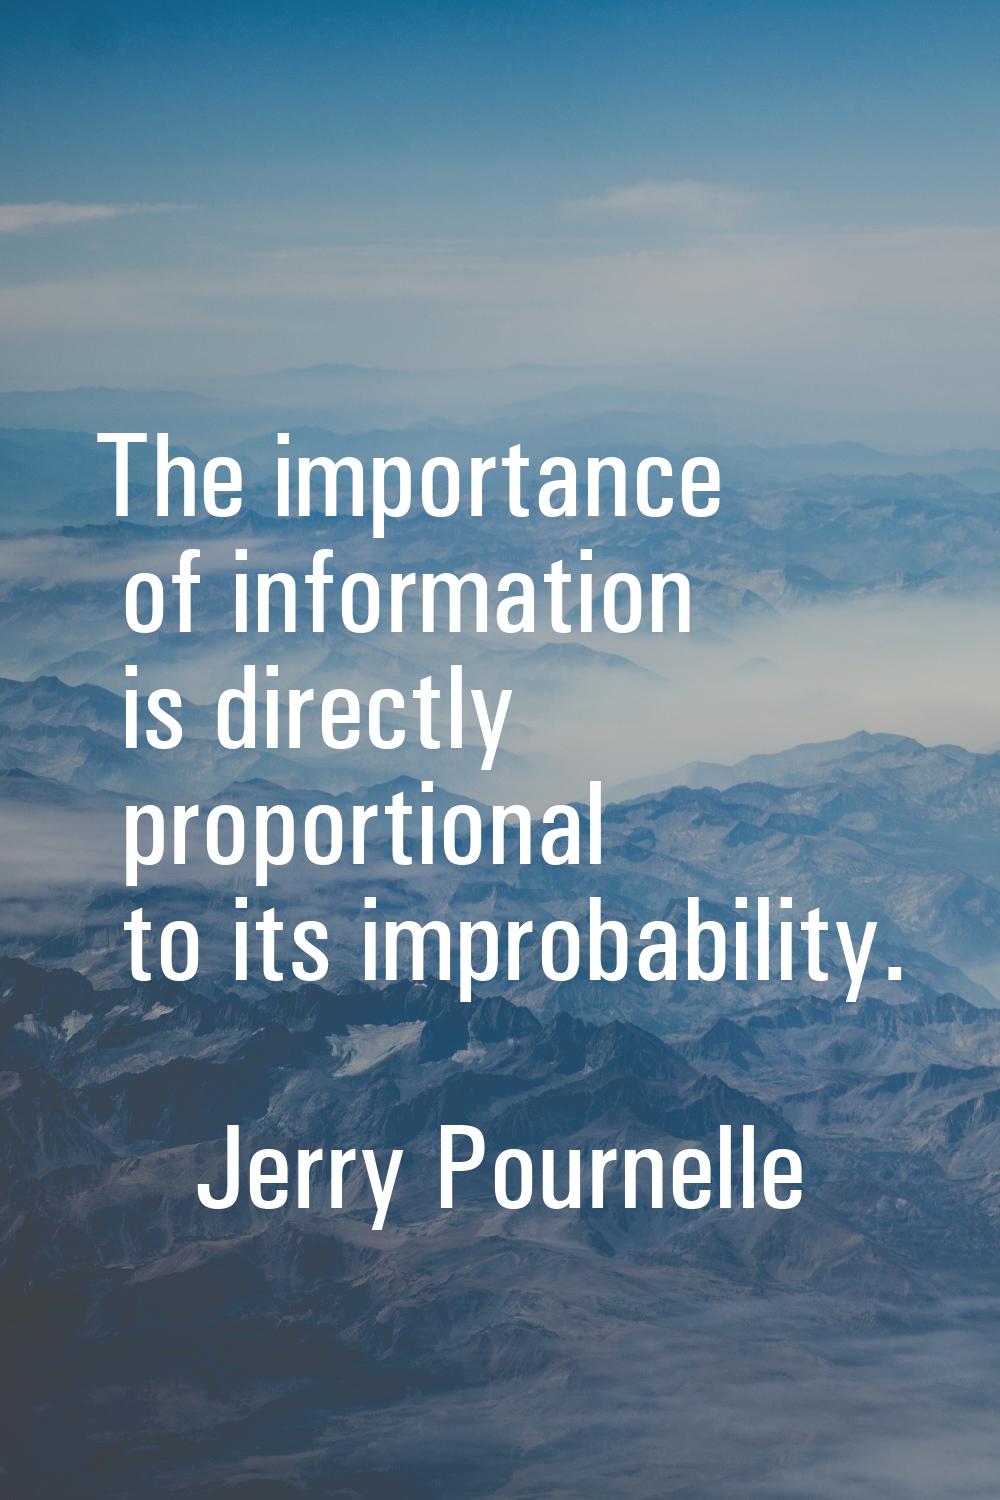 The importance of information is directly proportional to its improbability.